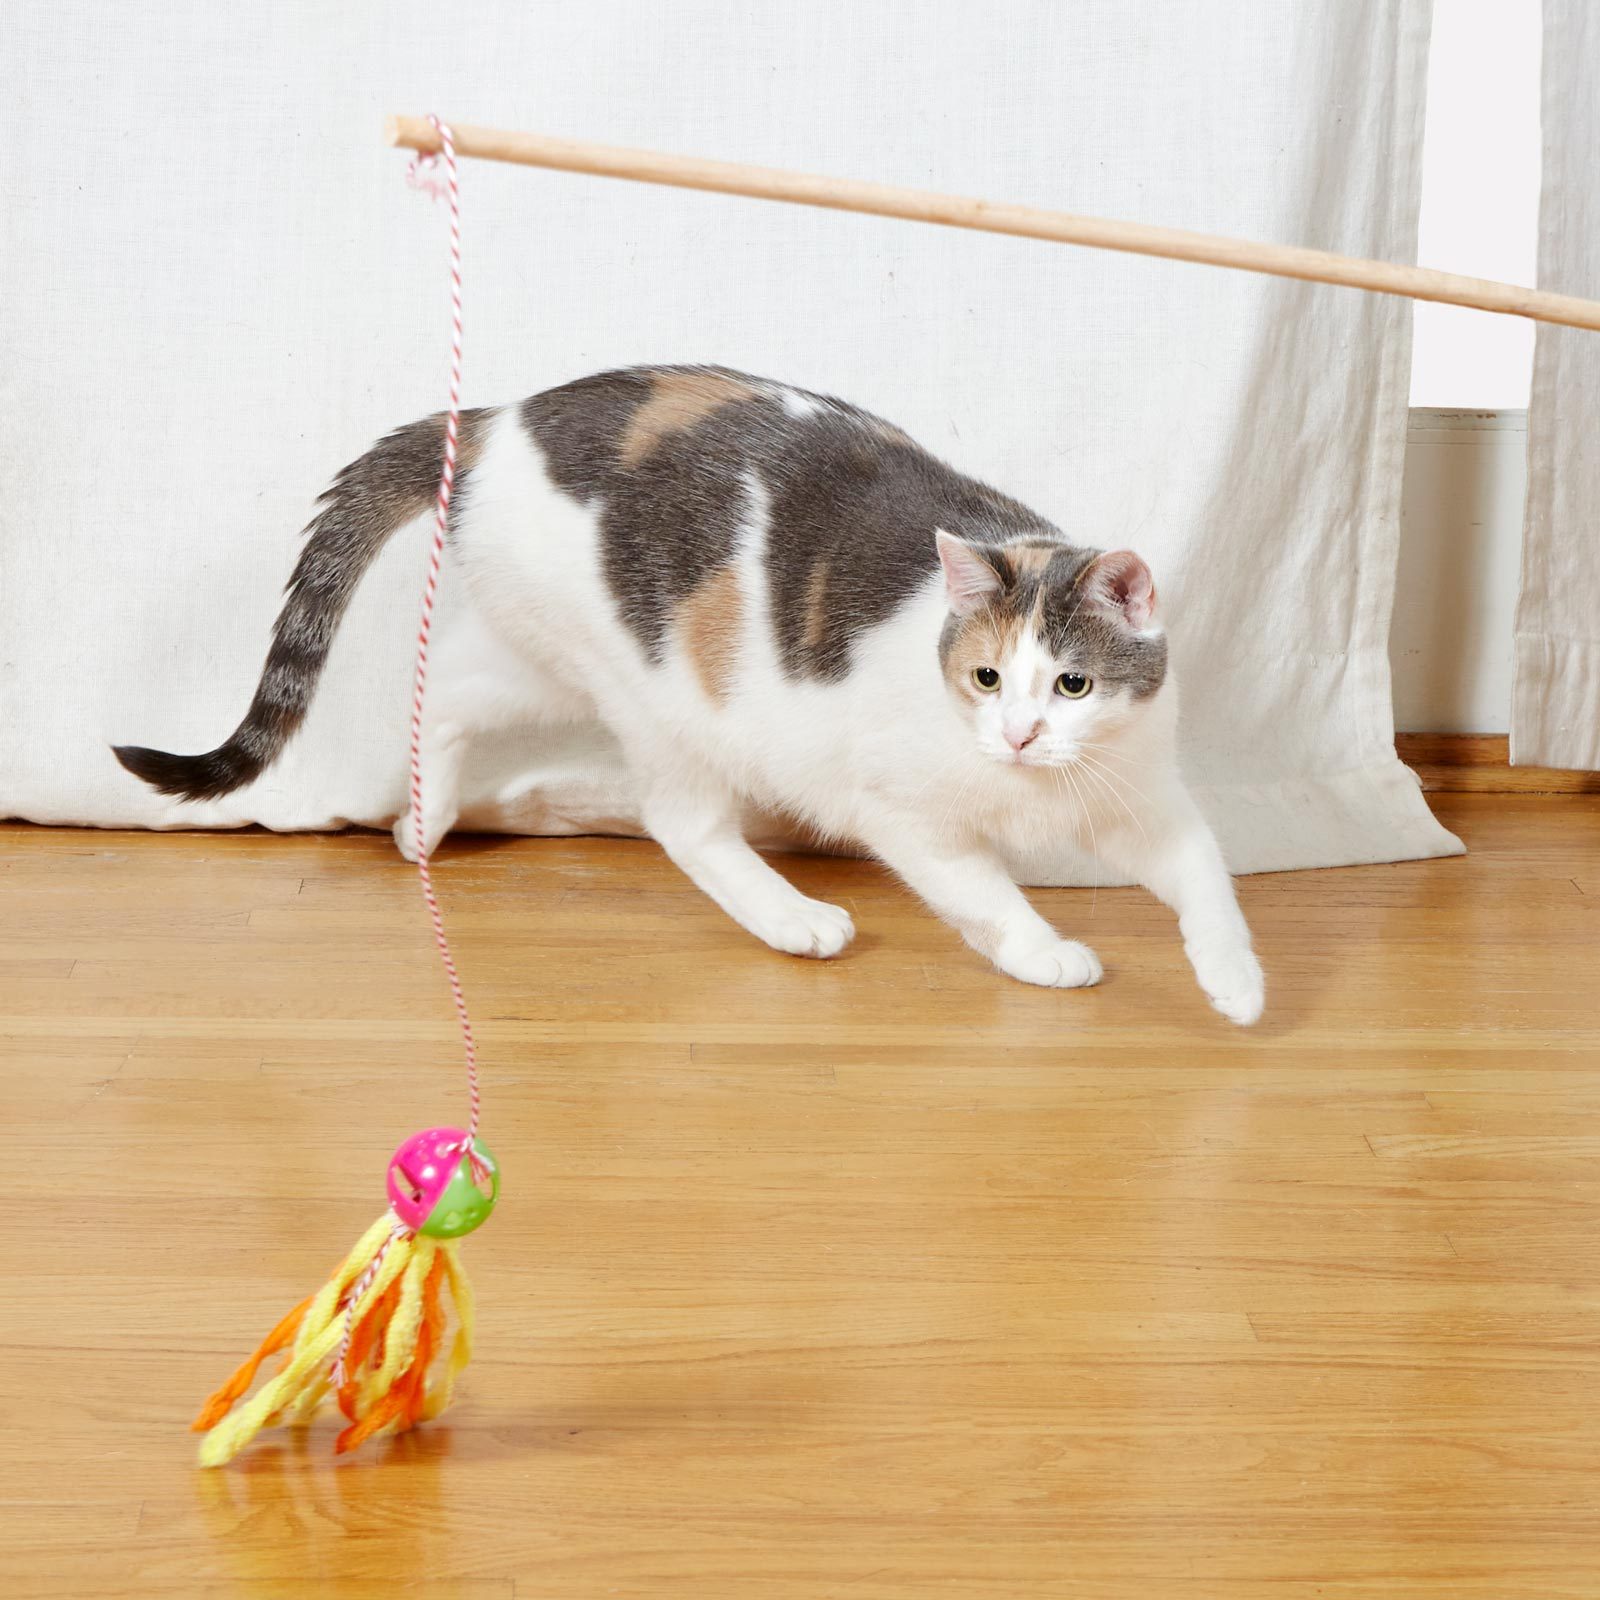 cat playing witha homemade yarn toy